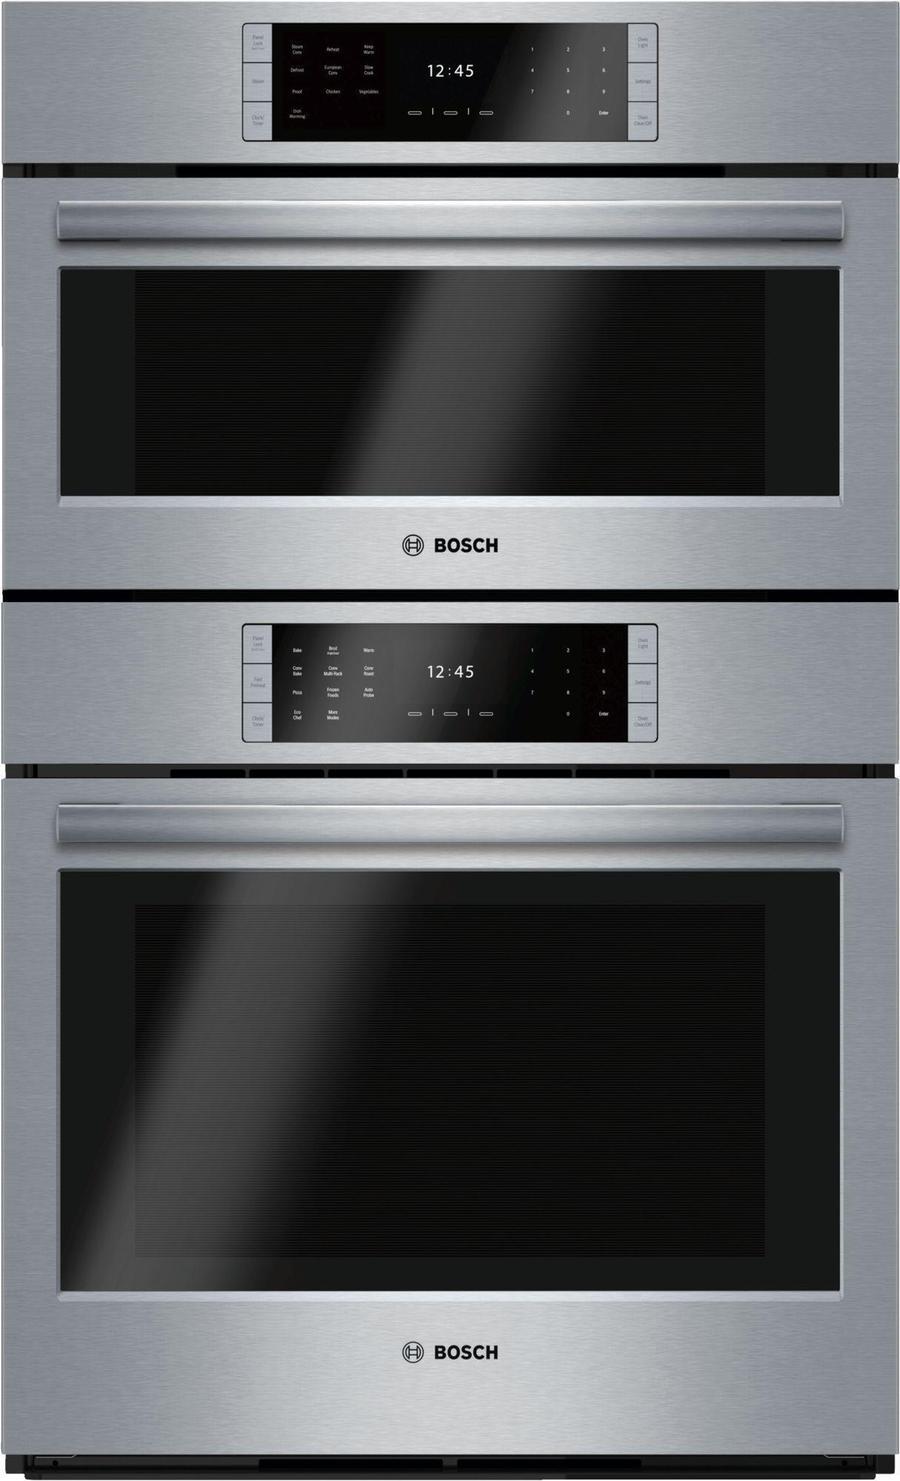 Bosch - 4.6 cu. ft Combination Wall Oven in Stainless Steel - HSLP751UC